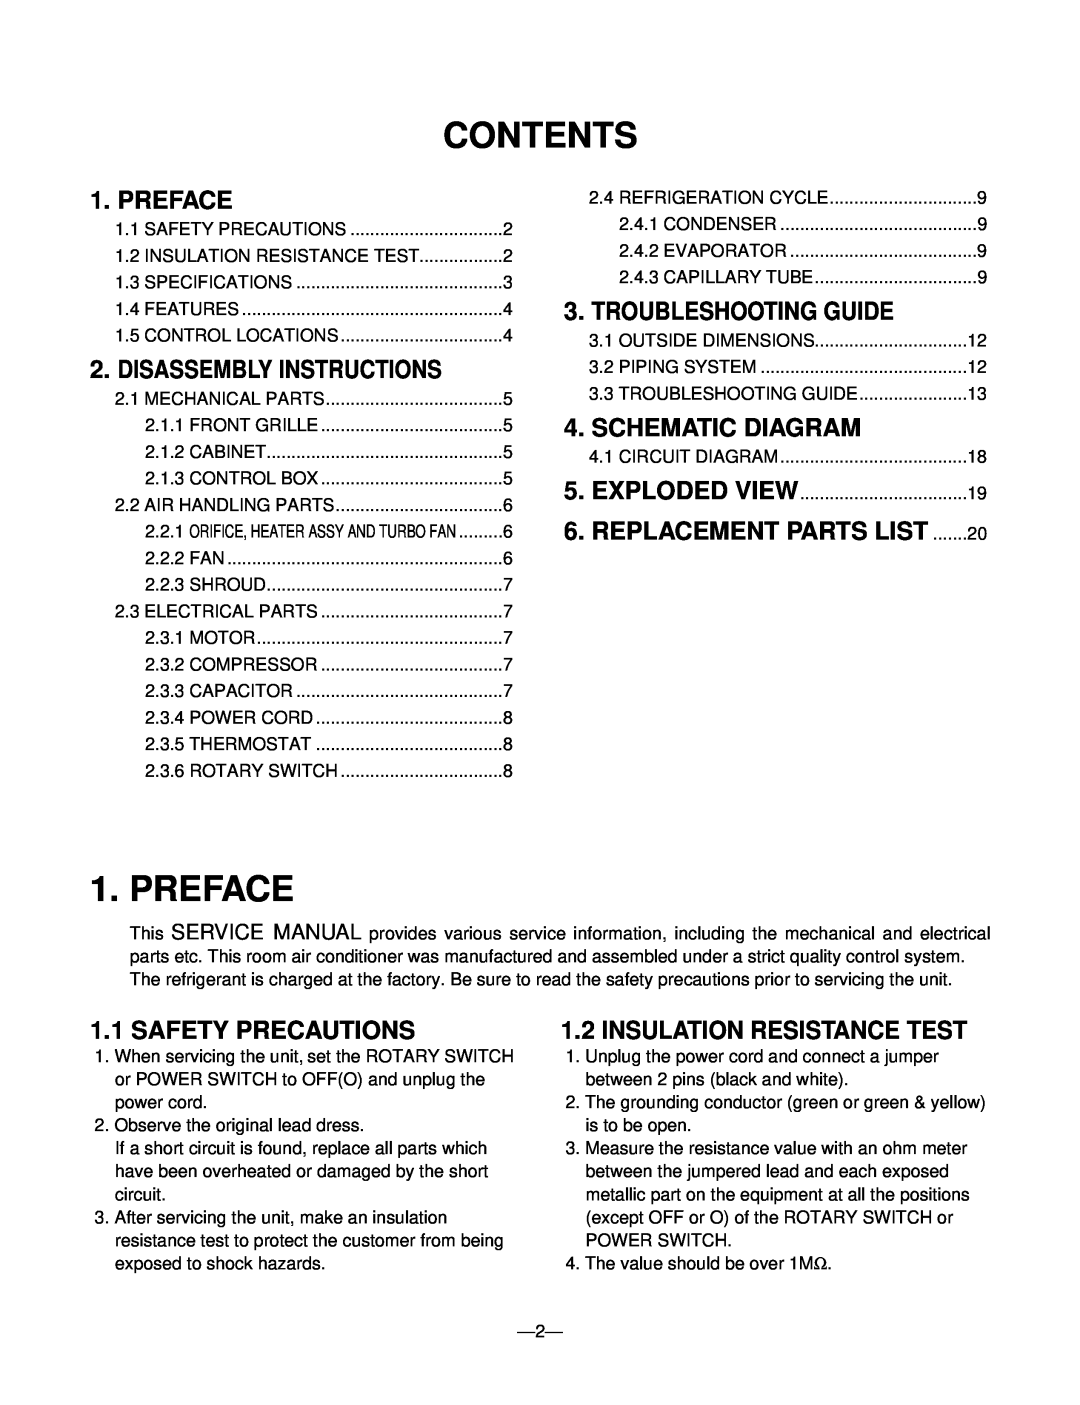 Friedrich UE08 Contents, Preface, Disassembly Instructions, Troubleshooting Guide, Schematic Diagram, Safety Precautions 